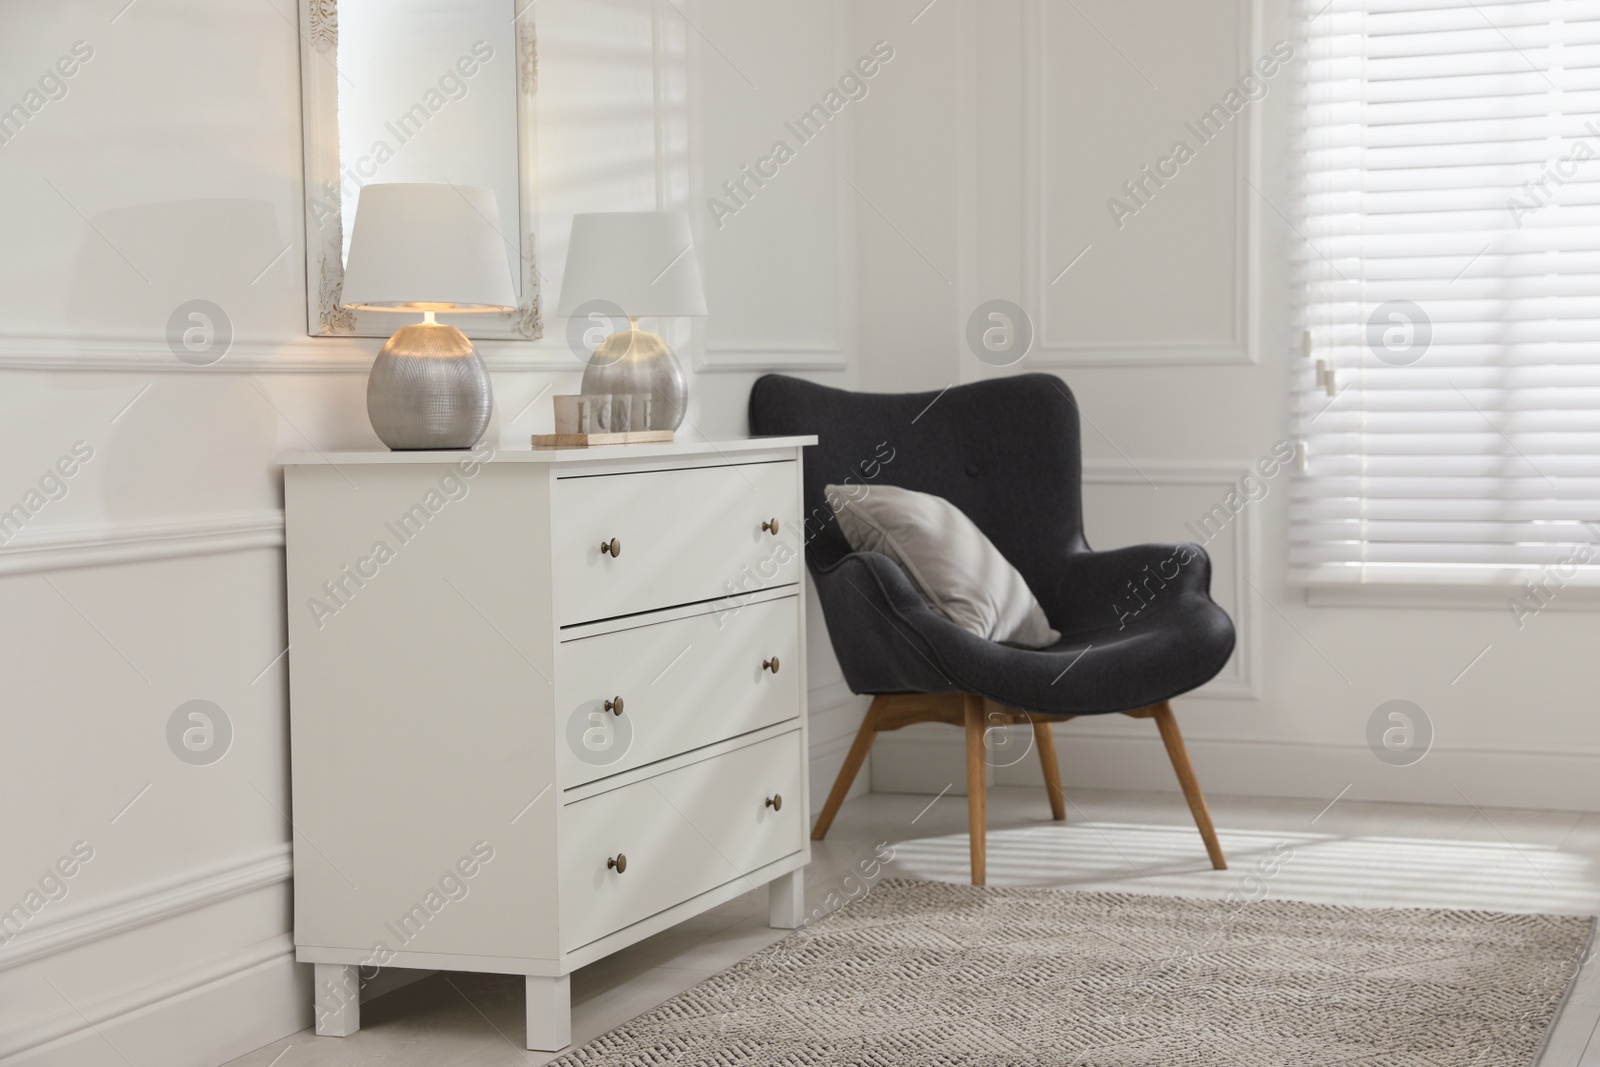 Photo of White chest of drawers, armchair and mirror in room. Interior design